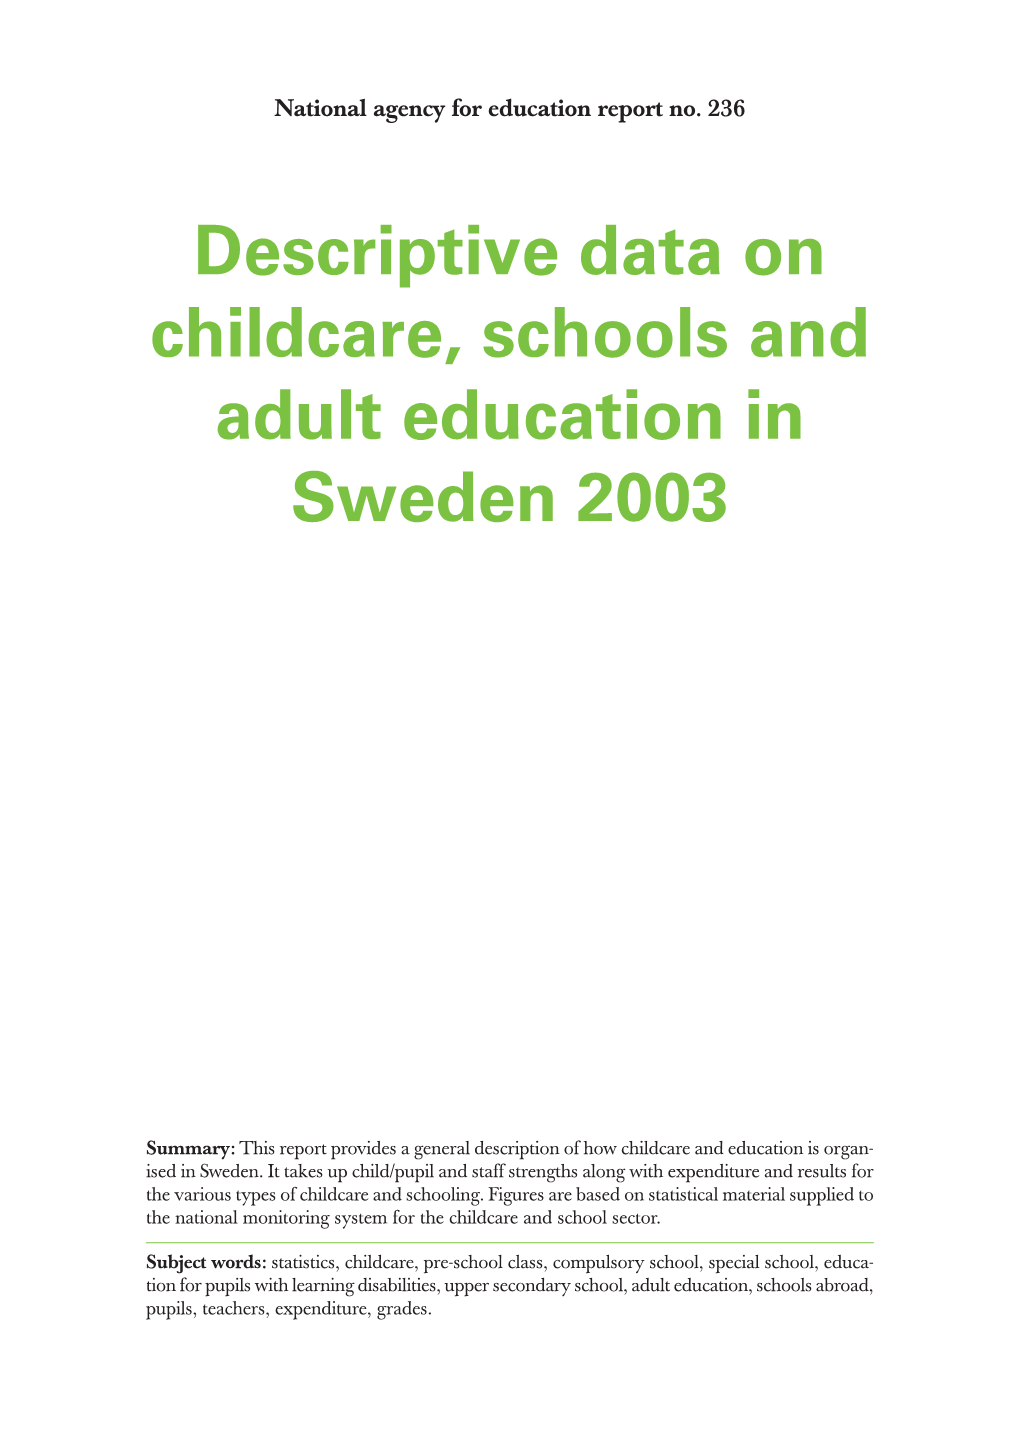 Descriptive Data on Childcare, Schools and Adult Education in Sweden 2003